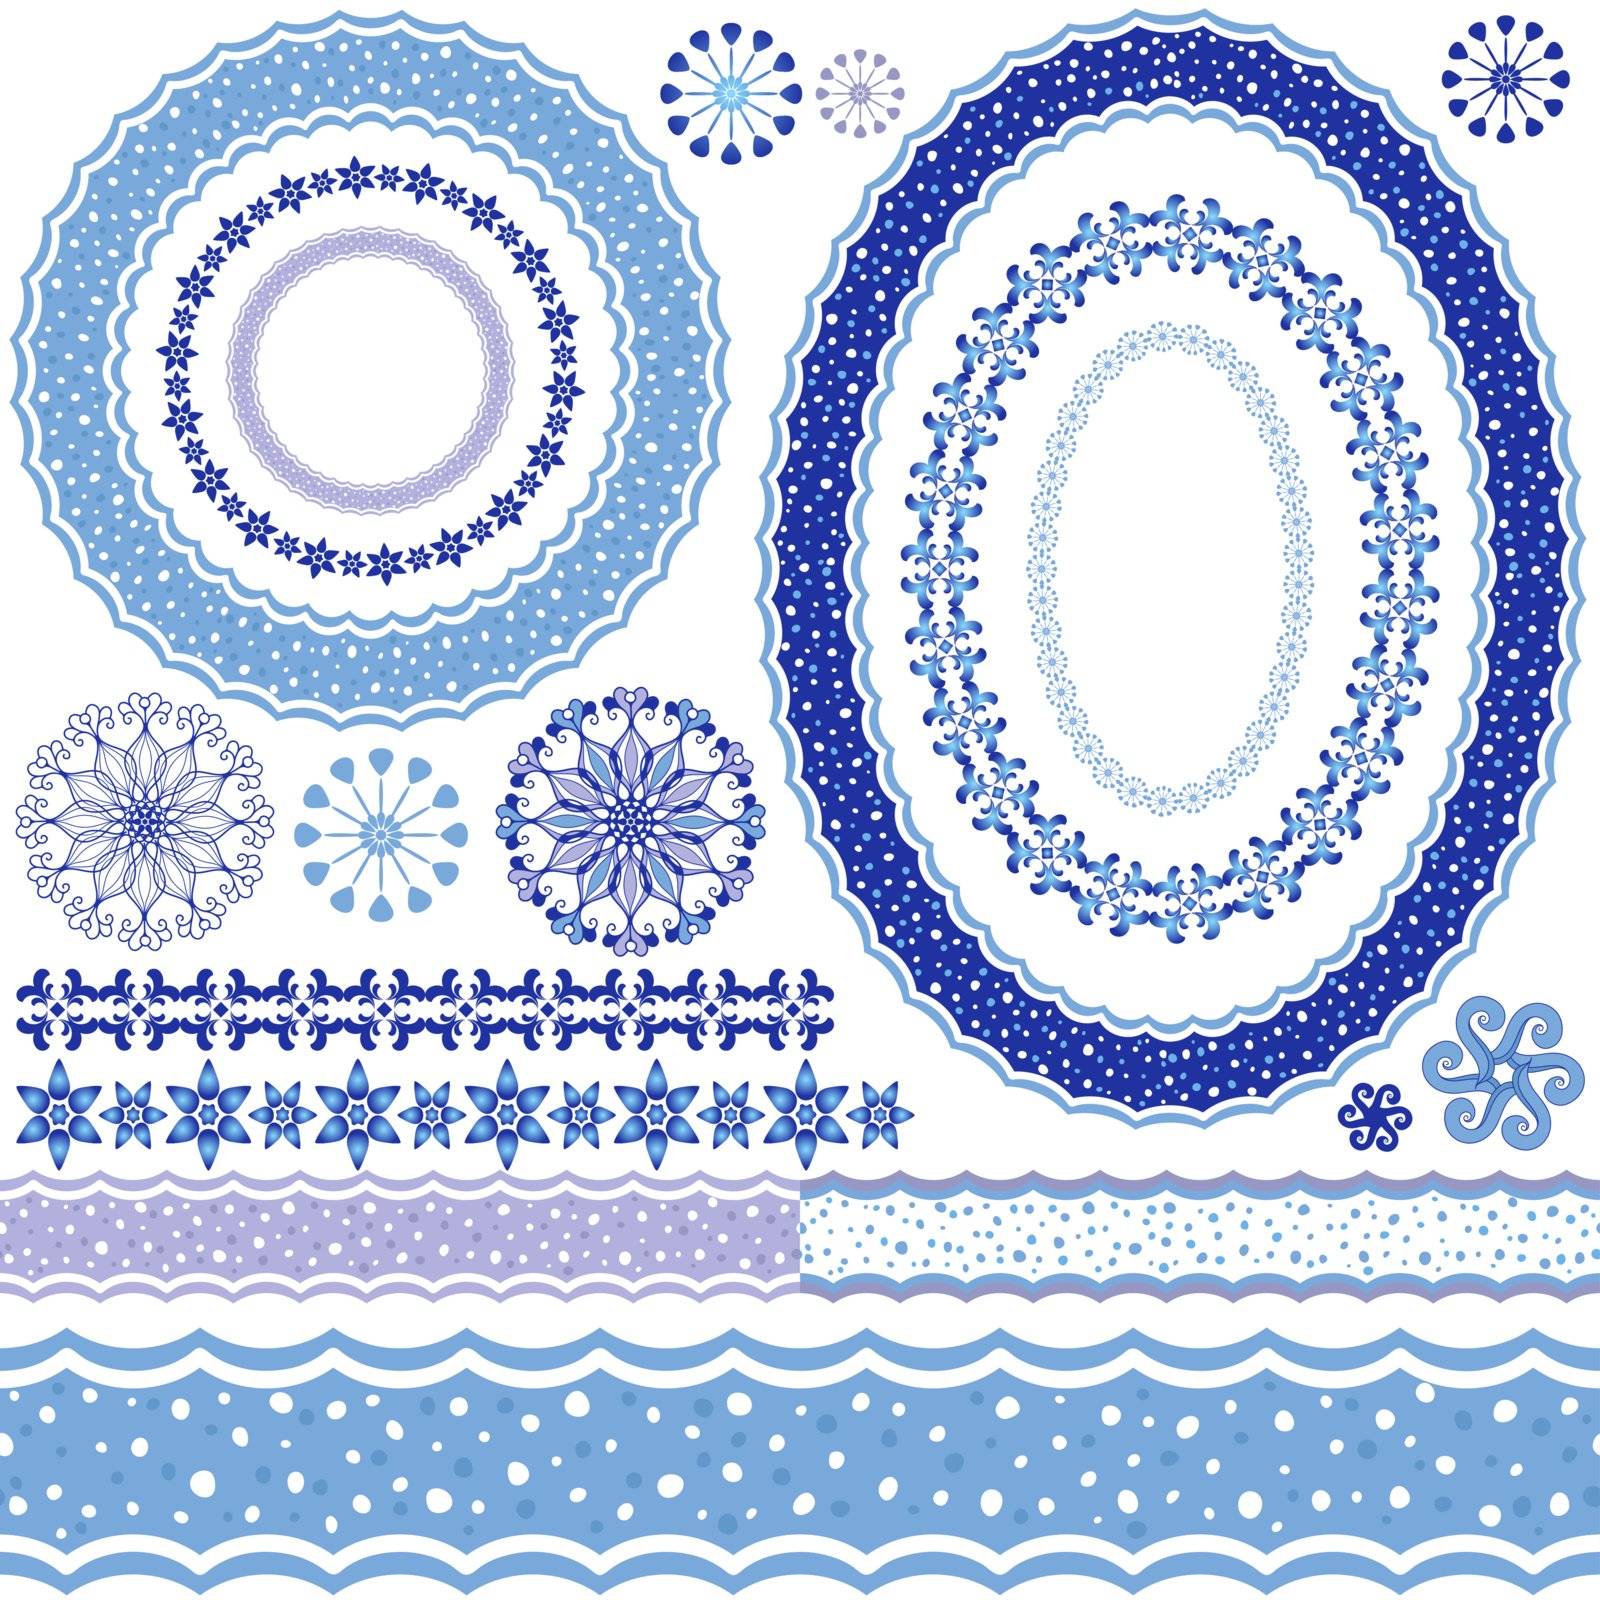 White-blue decorative frame and patterns by OlgaDrozd